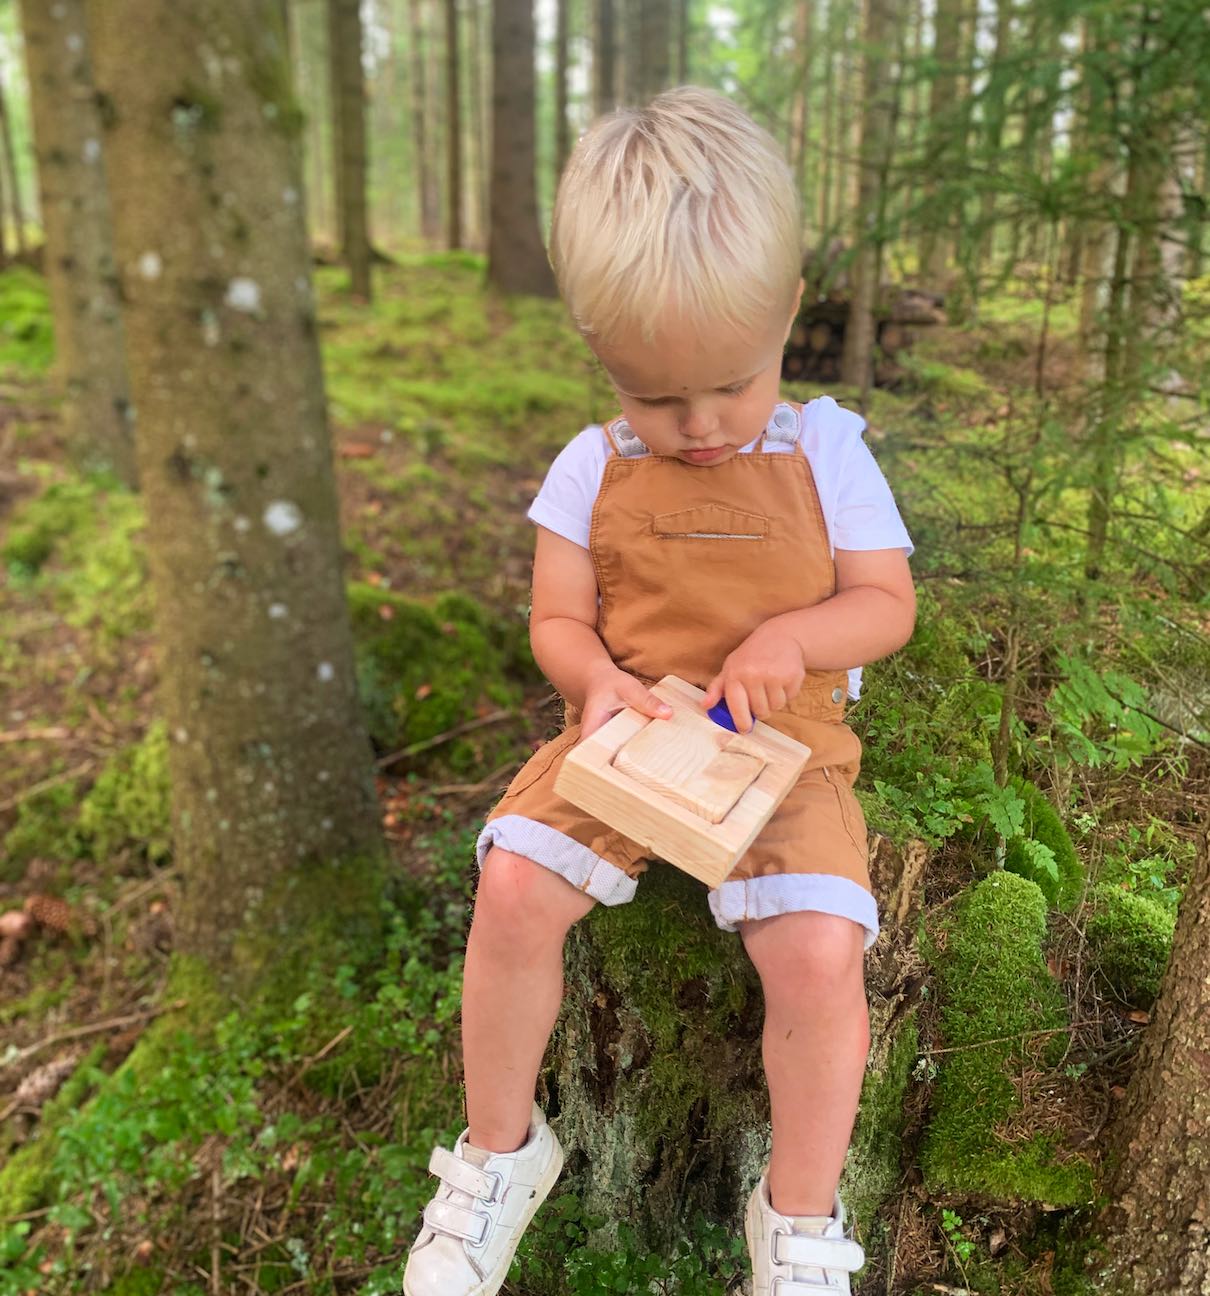 A young boy sits on a tree stump in a forrest. He plays with a wooden Voxblock prototype.